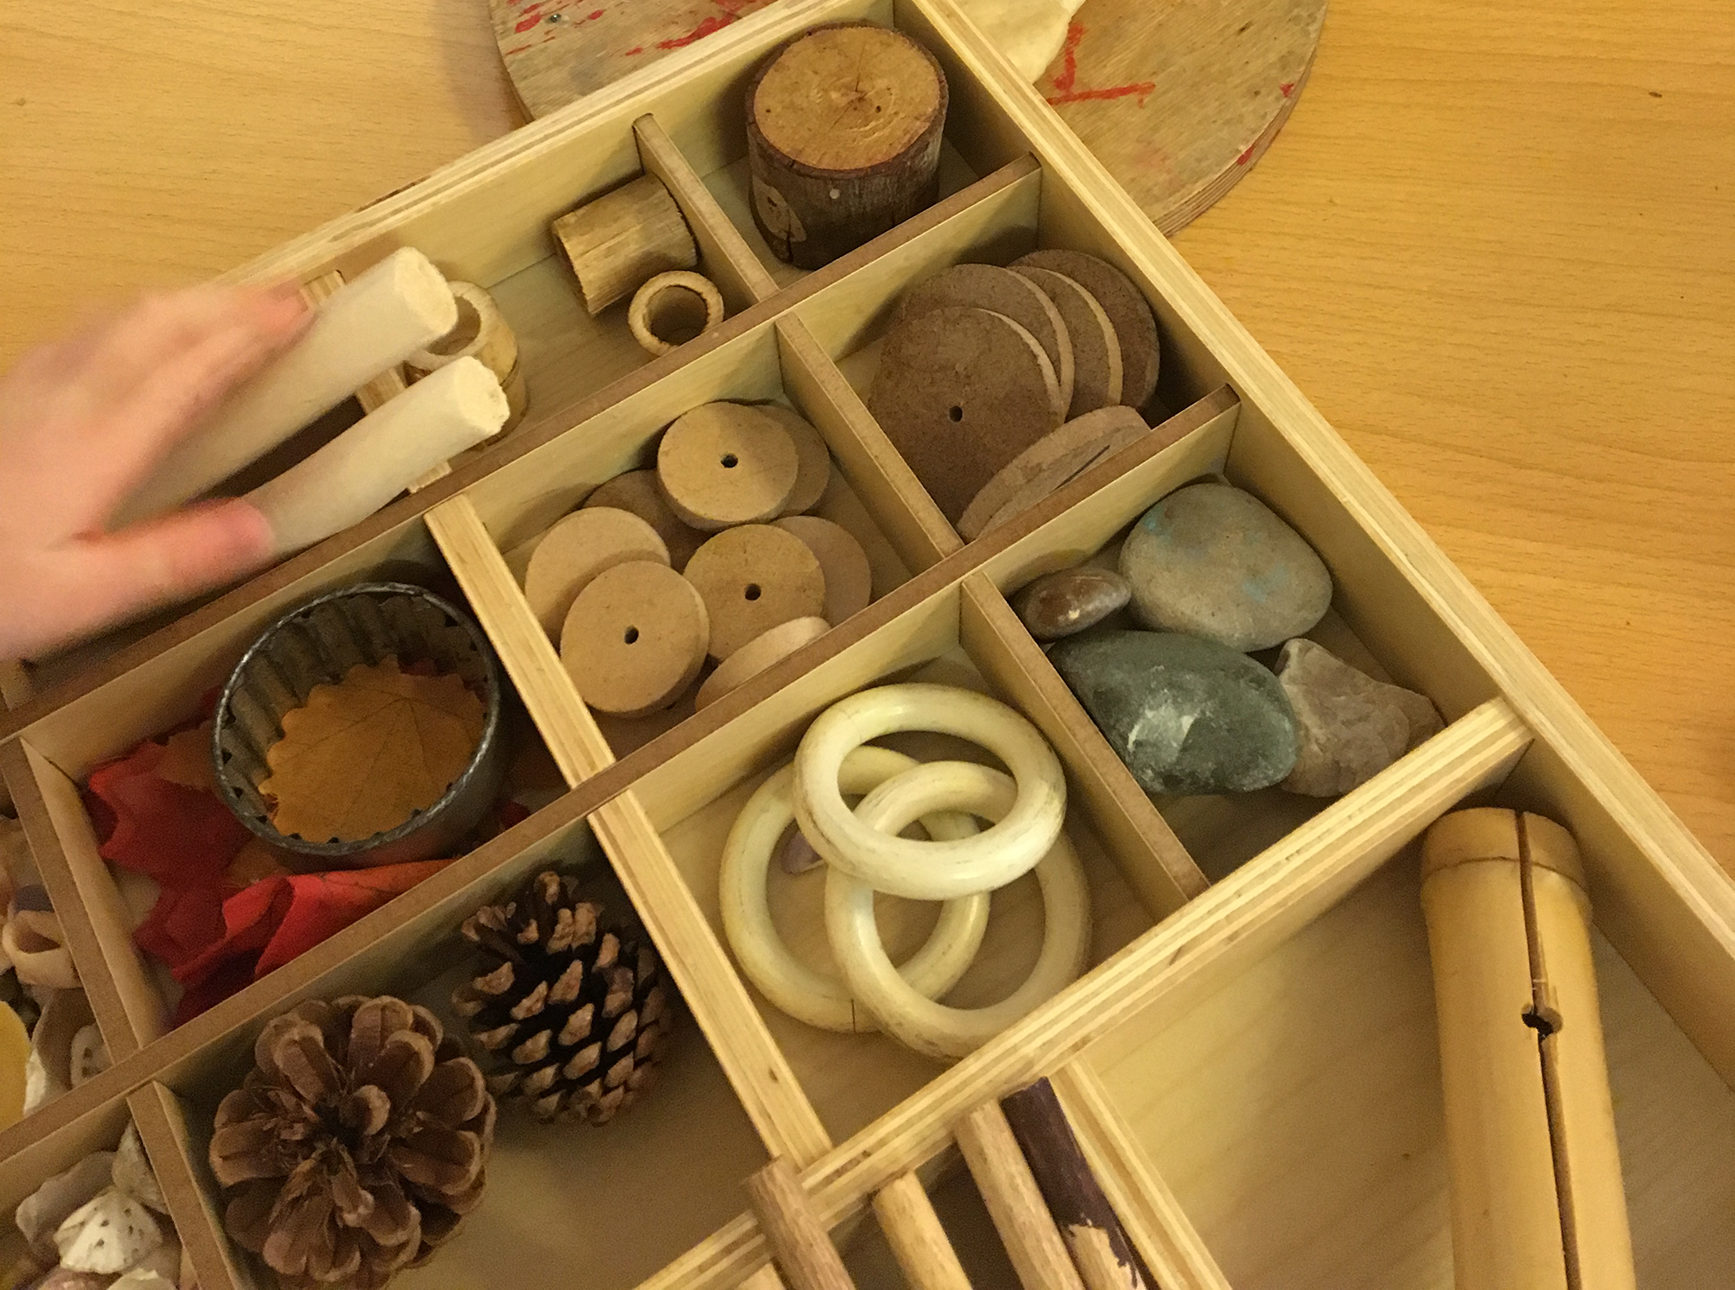 The appeal of tinker trays for loose part play by Little Miss Early Years